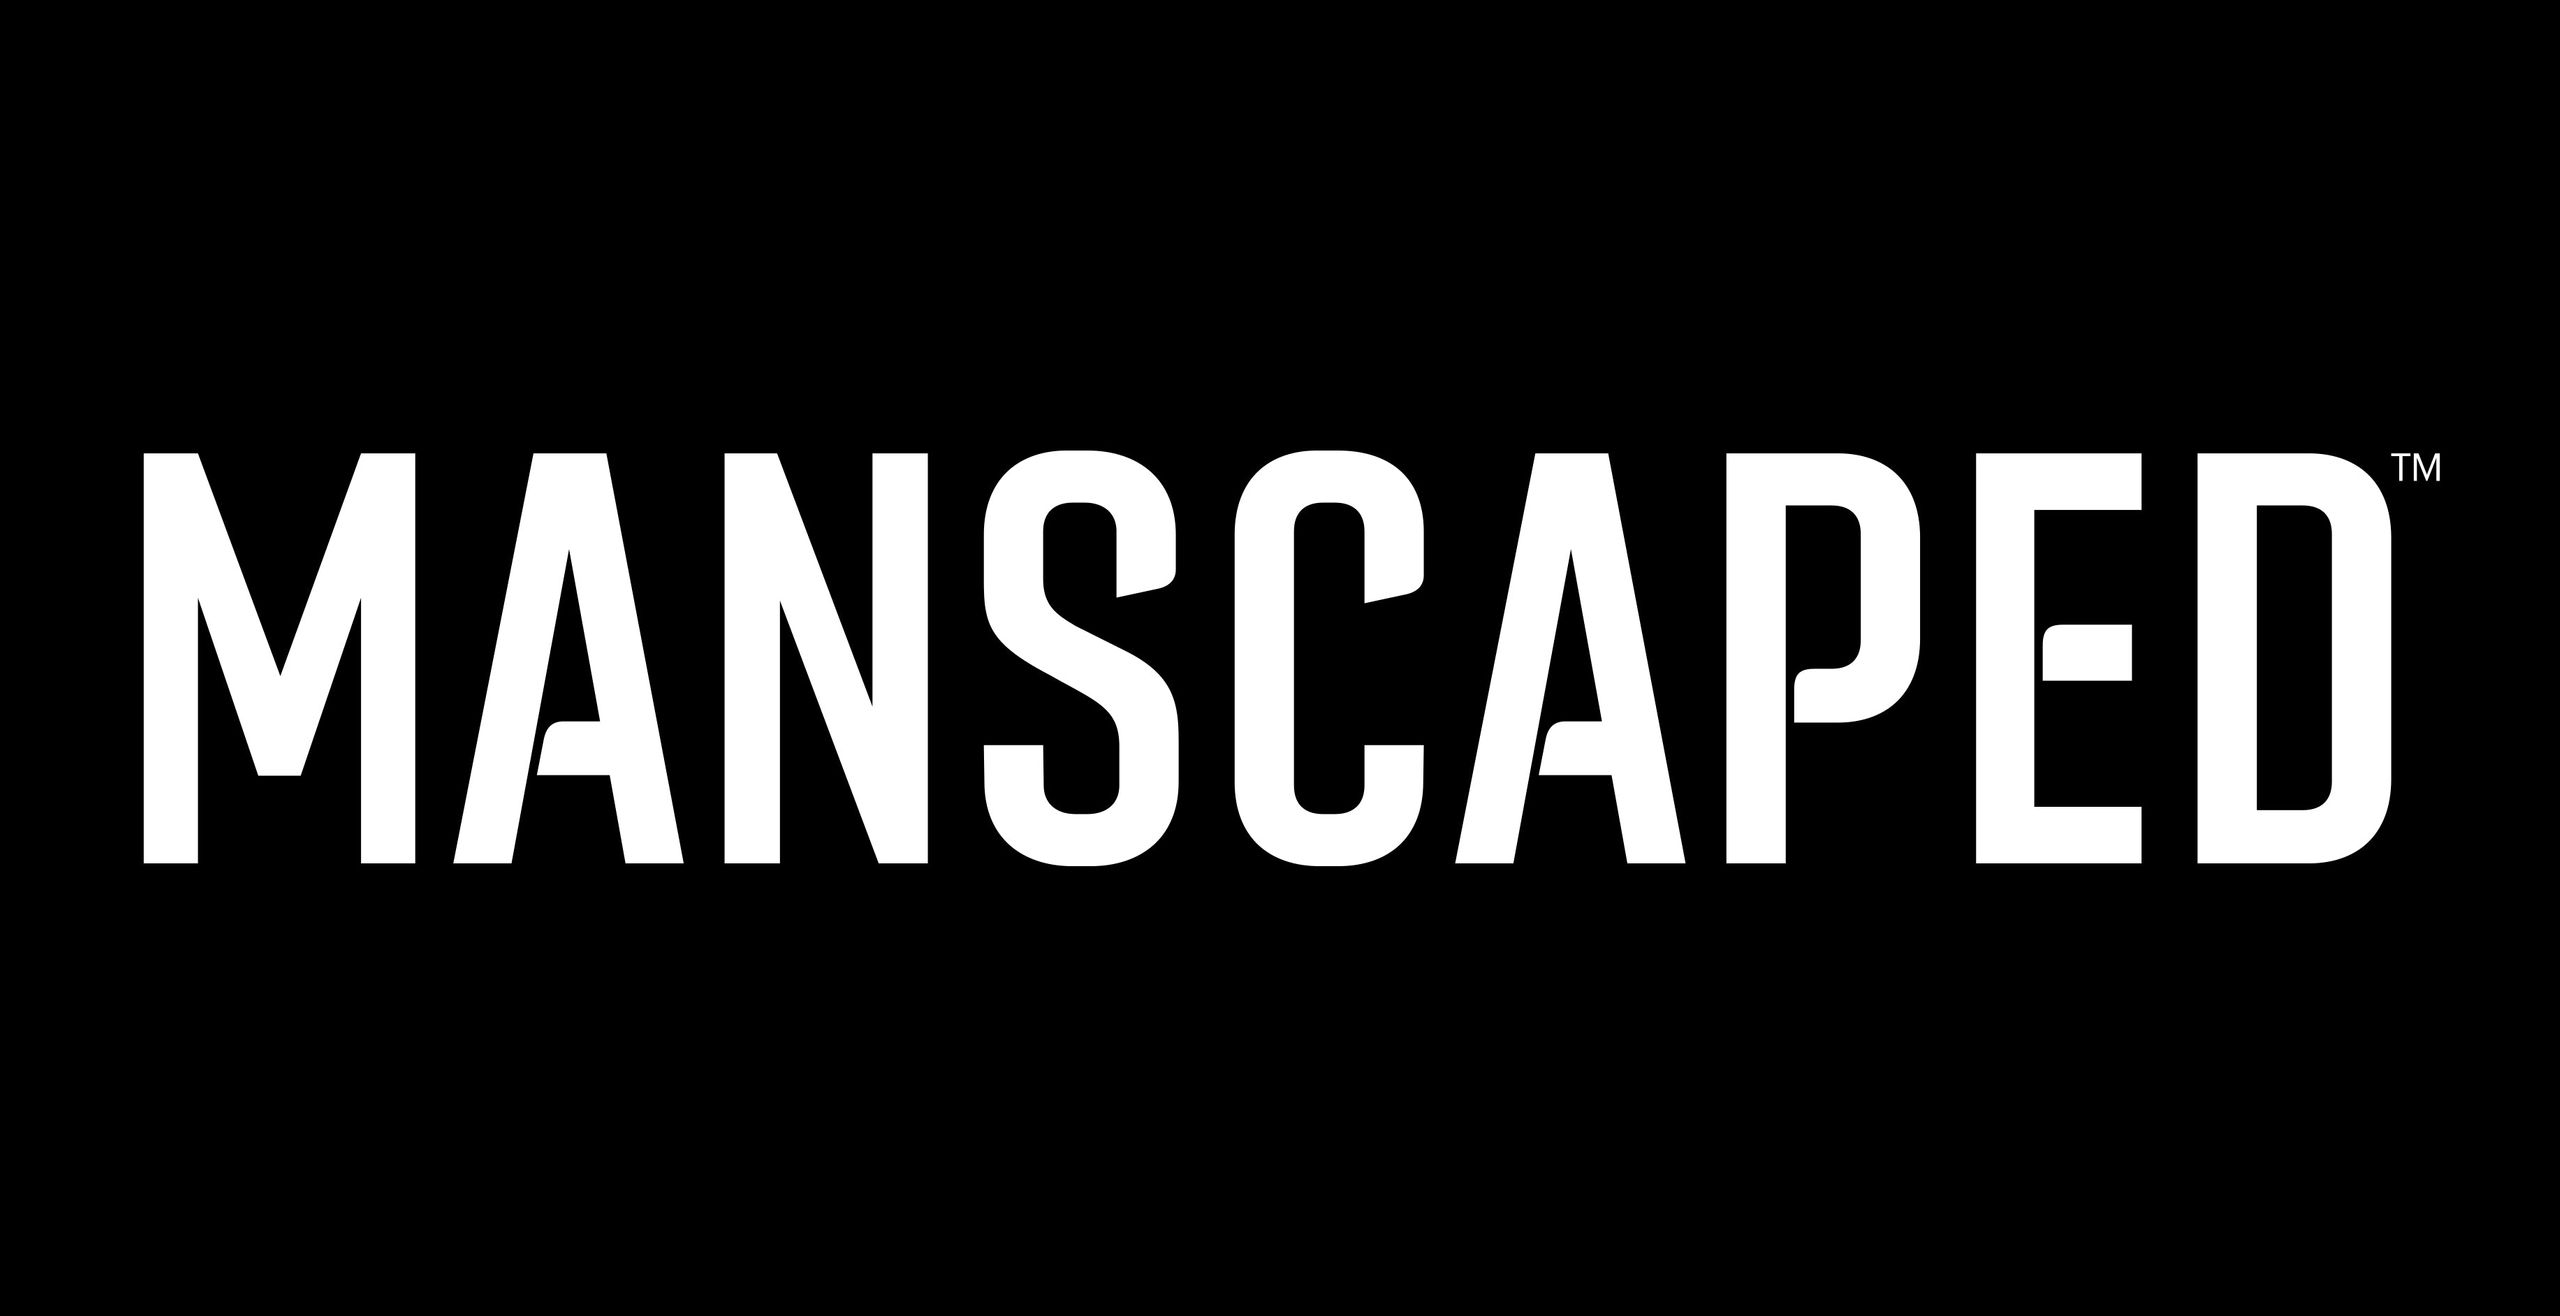 Benefits of using MANSCAPED®.